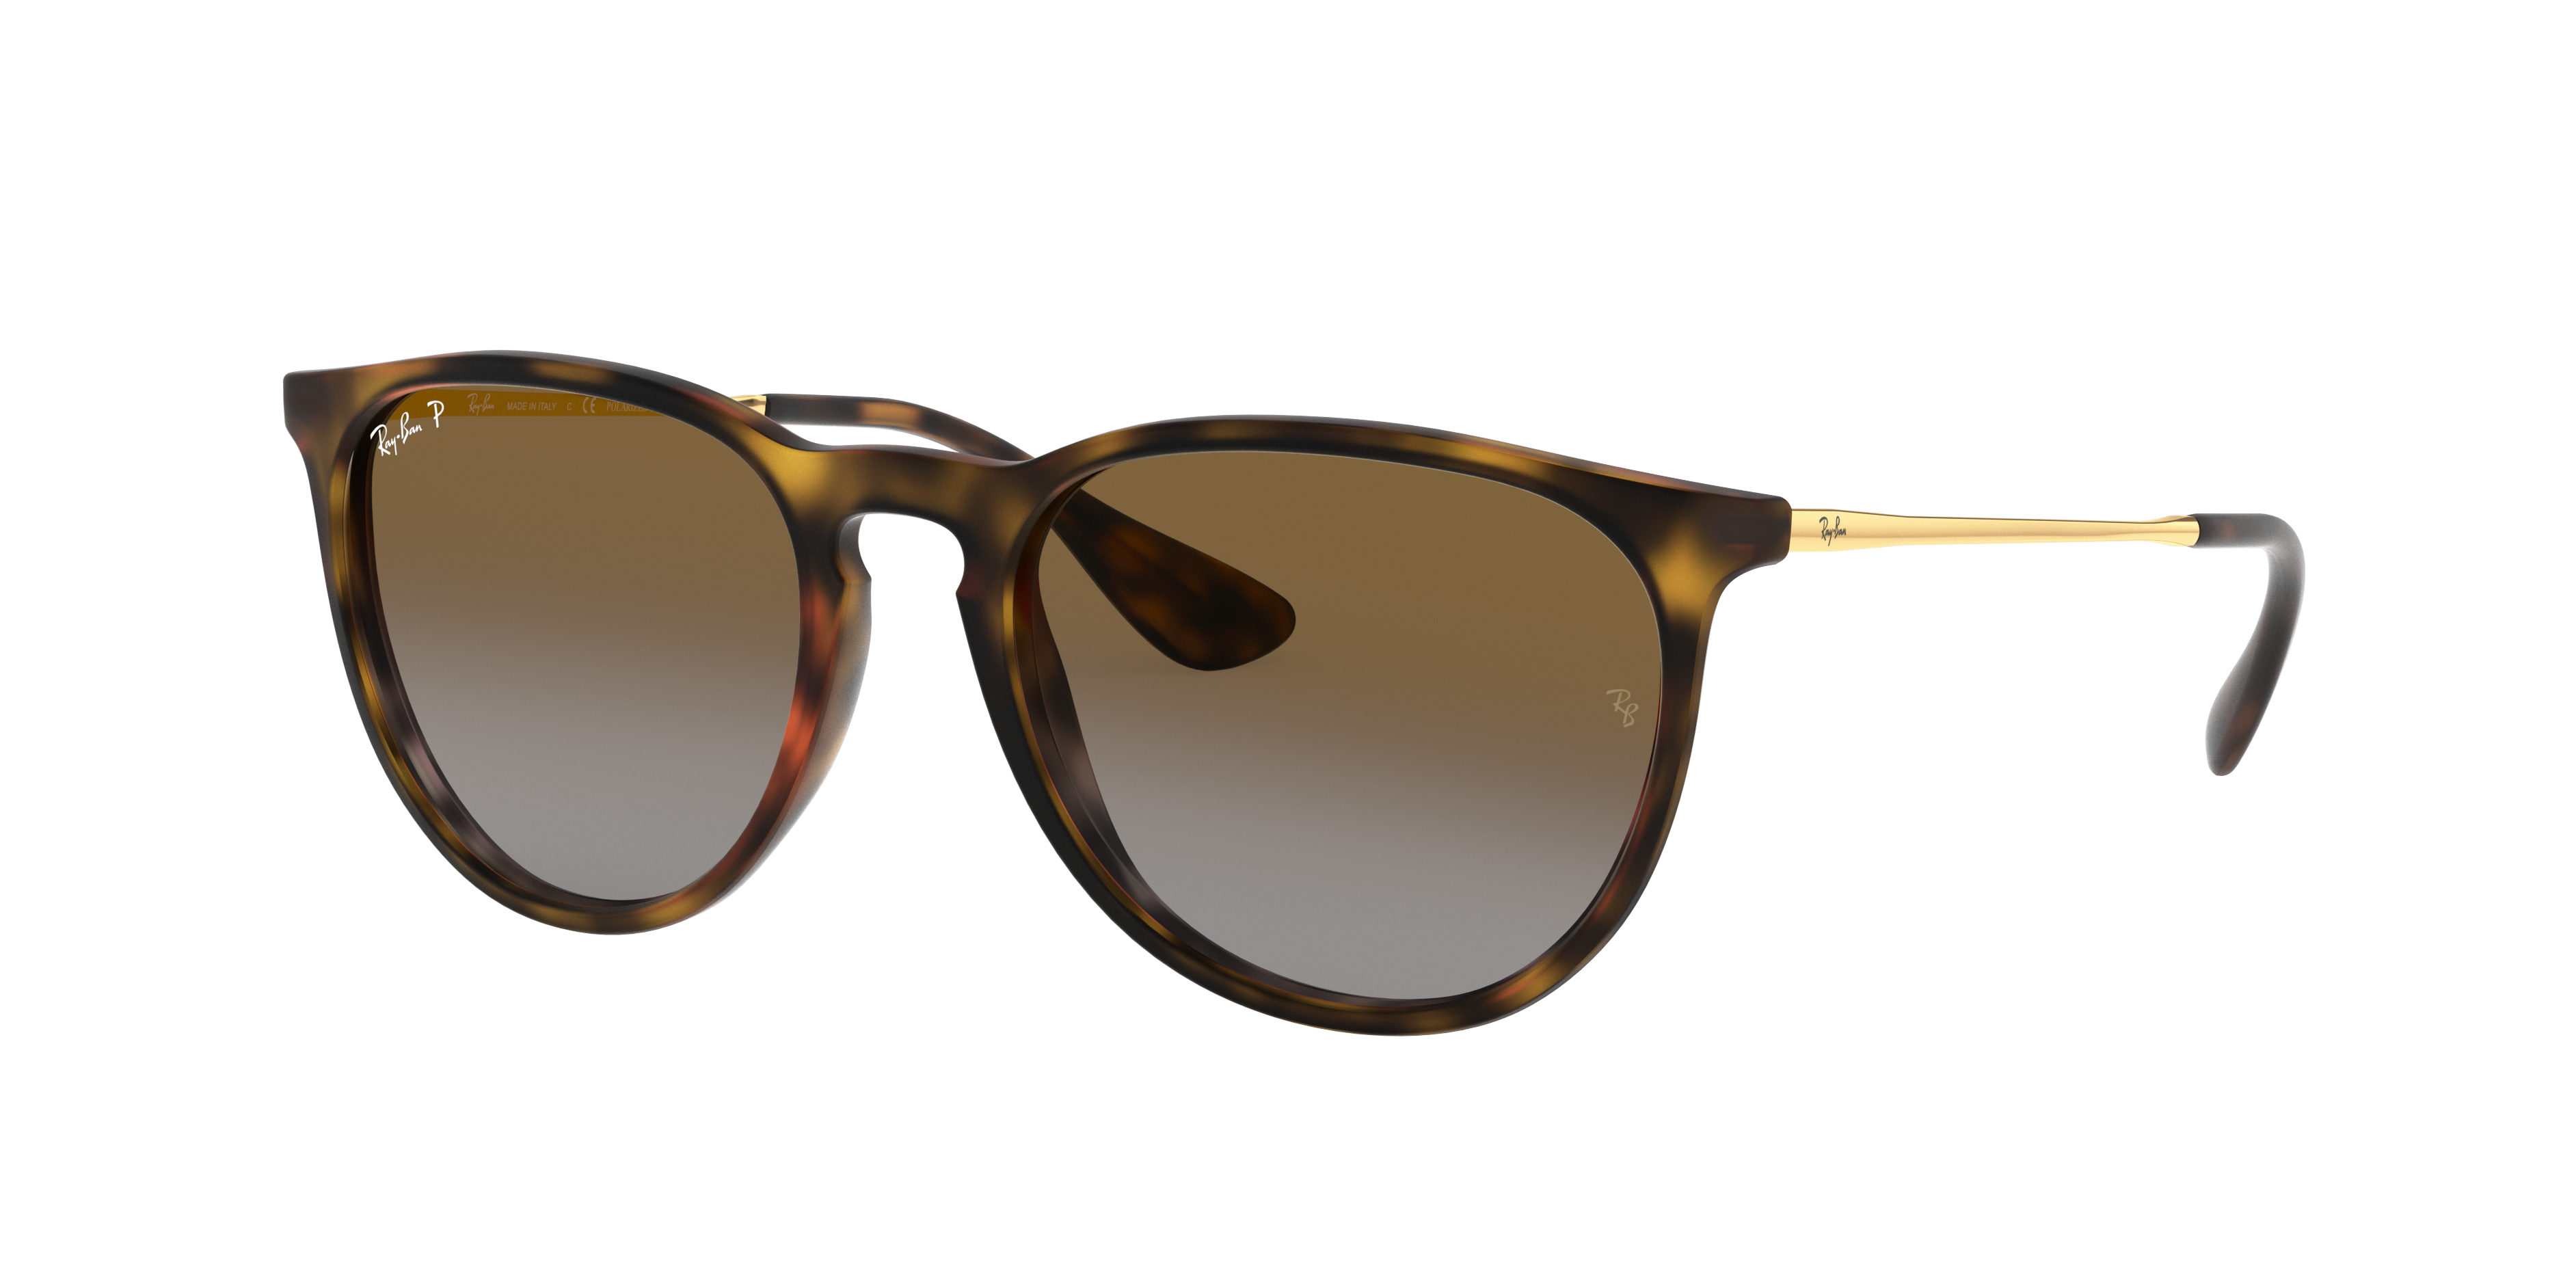 Merchandiser race Archaic Erika @collection Sunglasses in Tortoise and Brown | Ray-Ban®